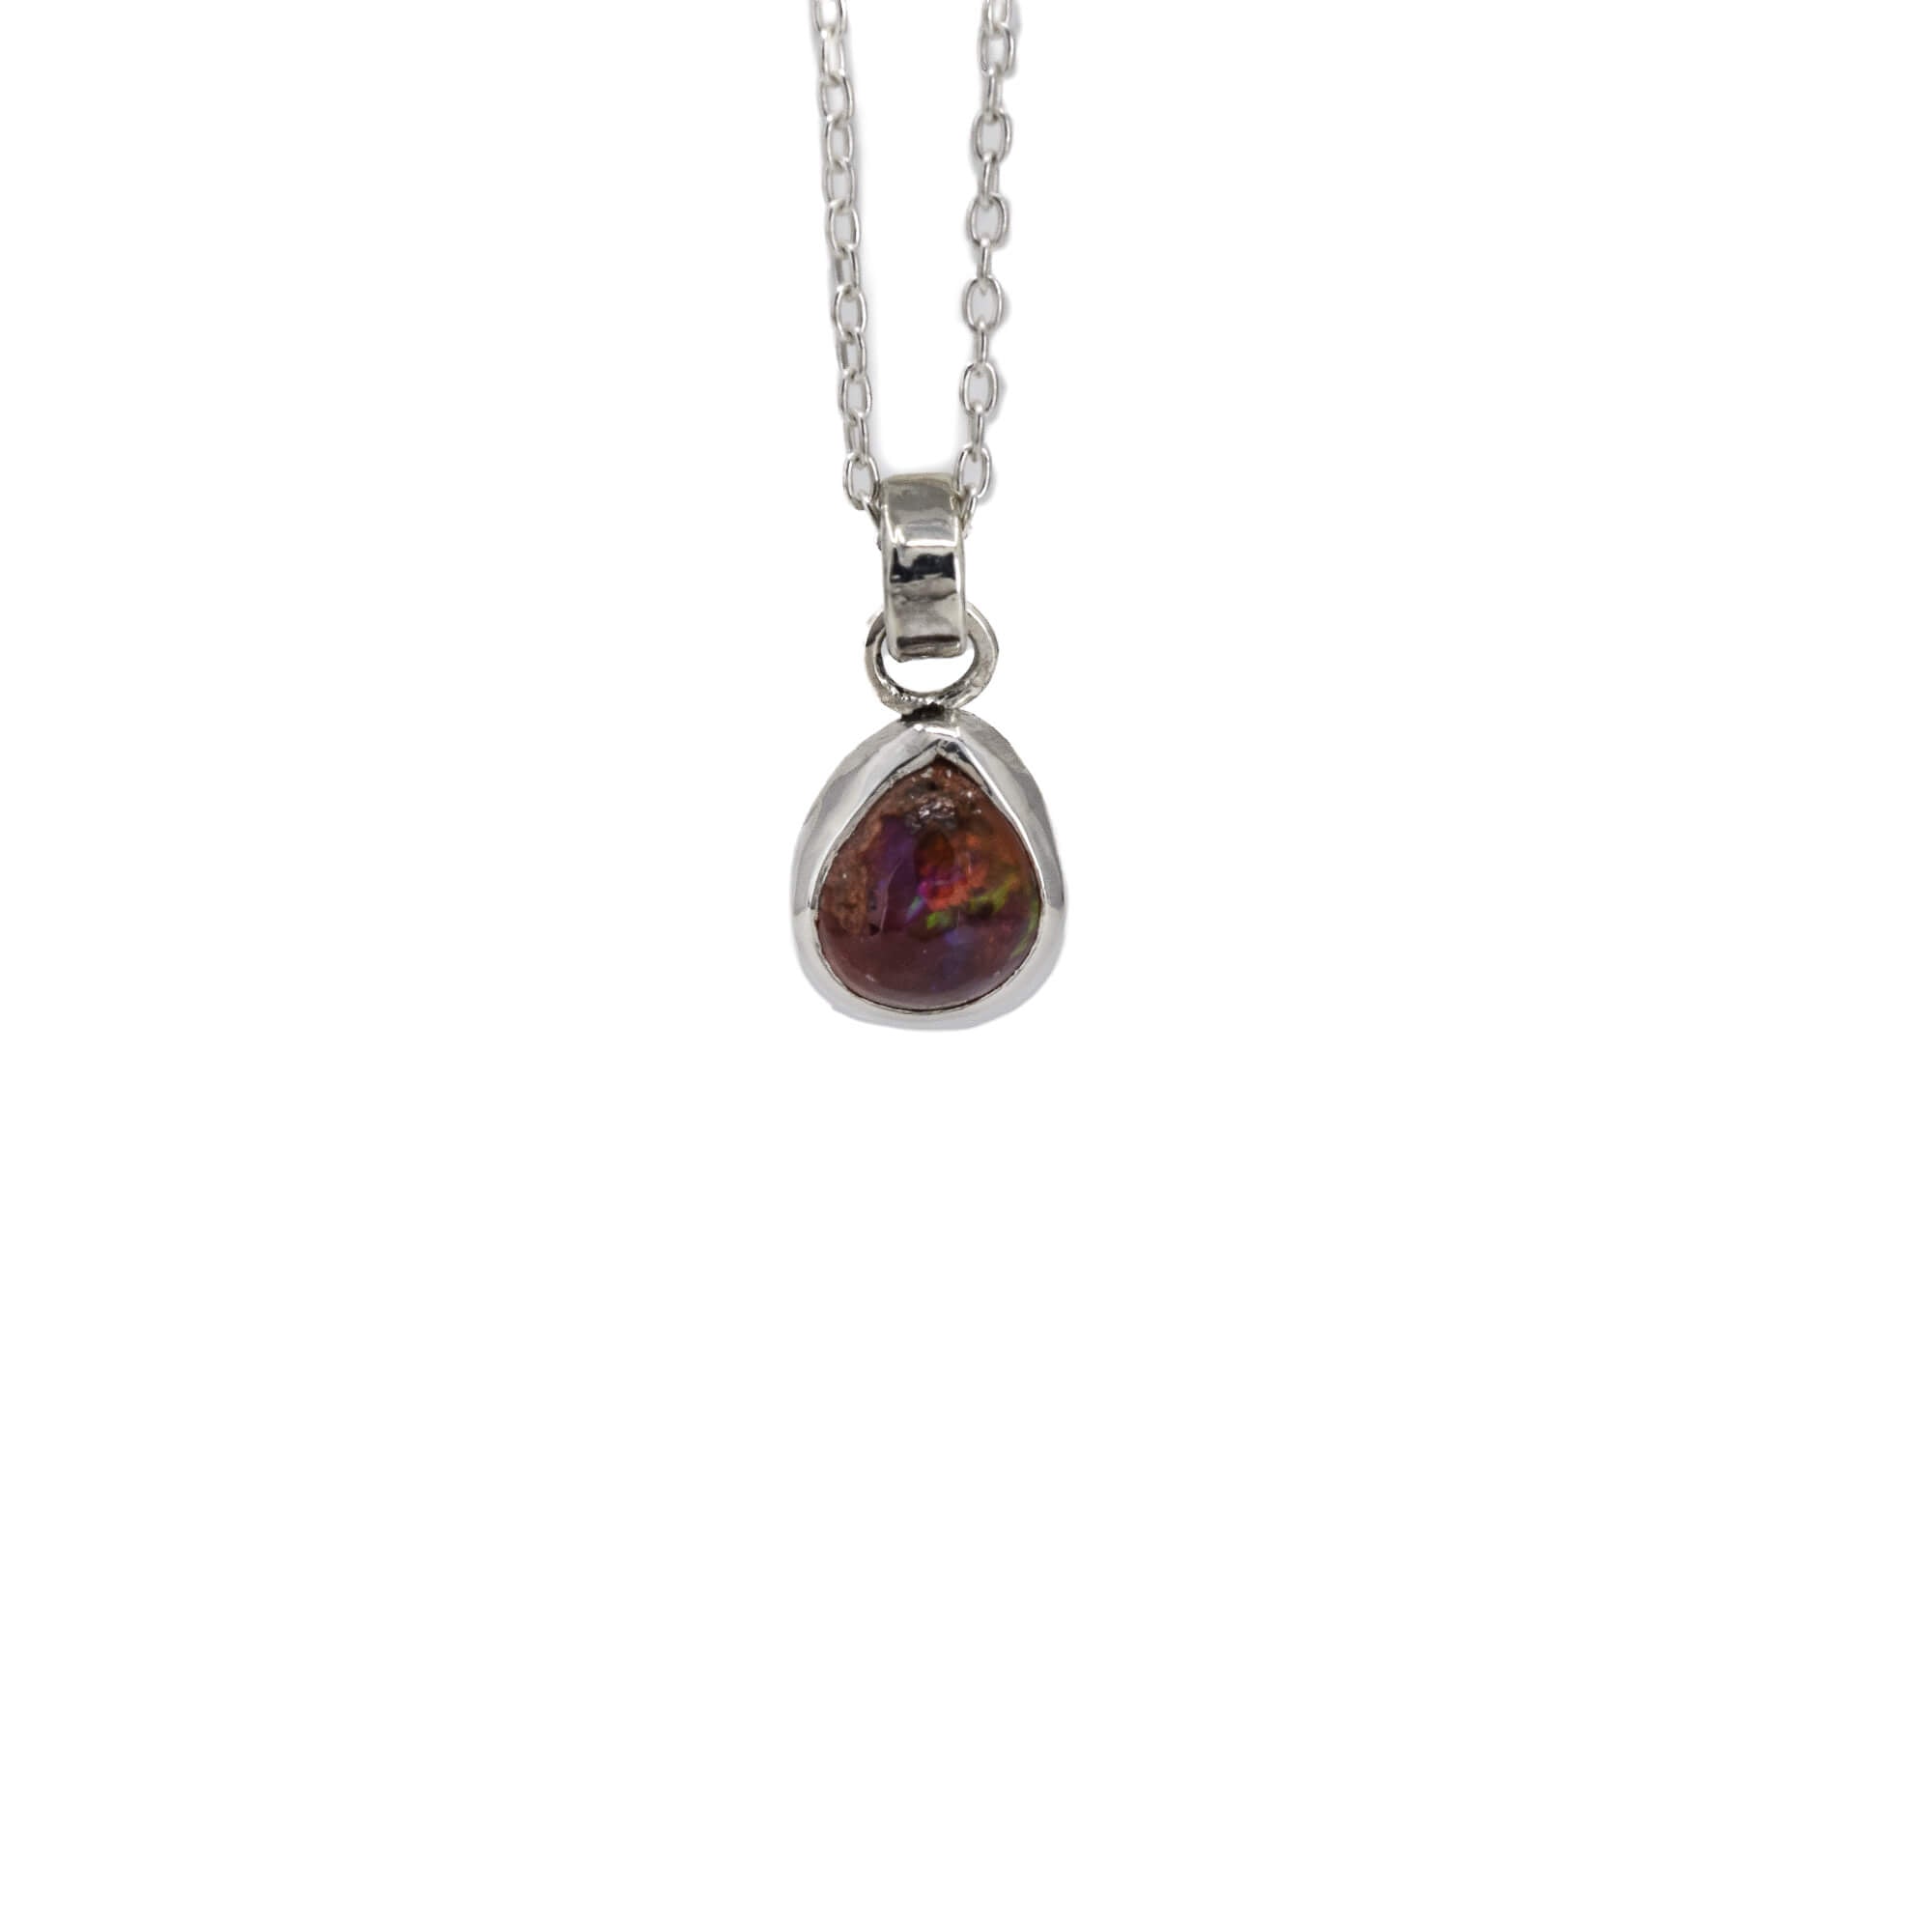 Small cantera opal pendant in sterling silver